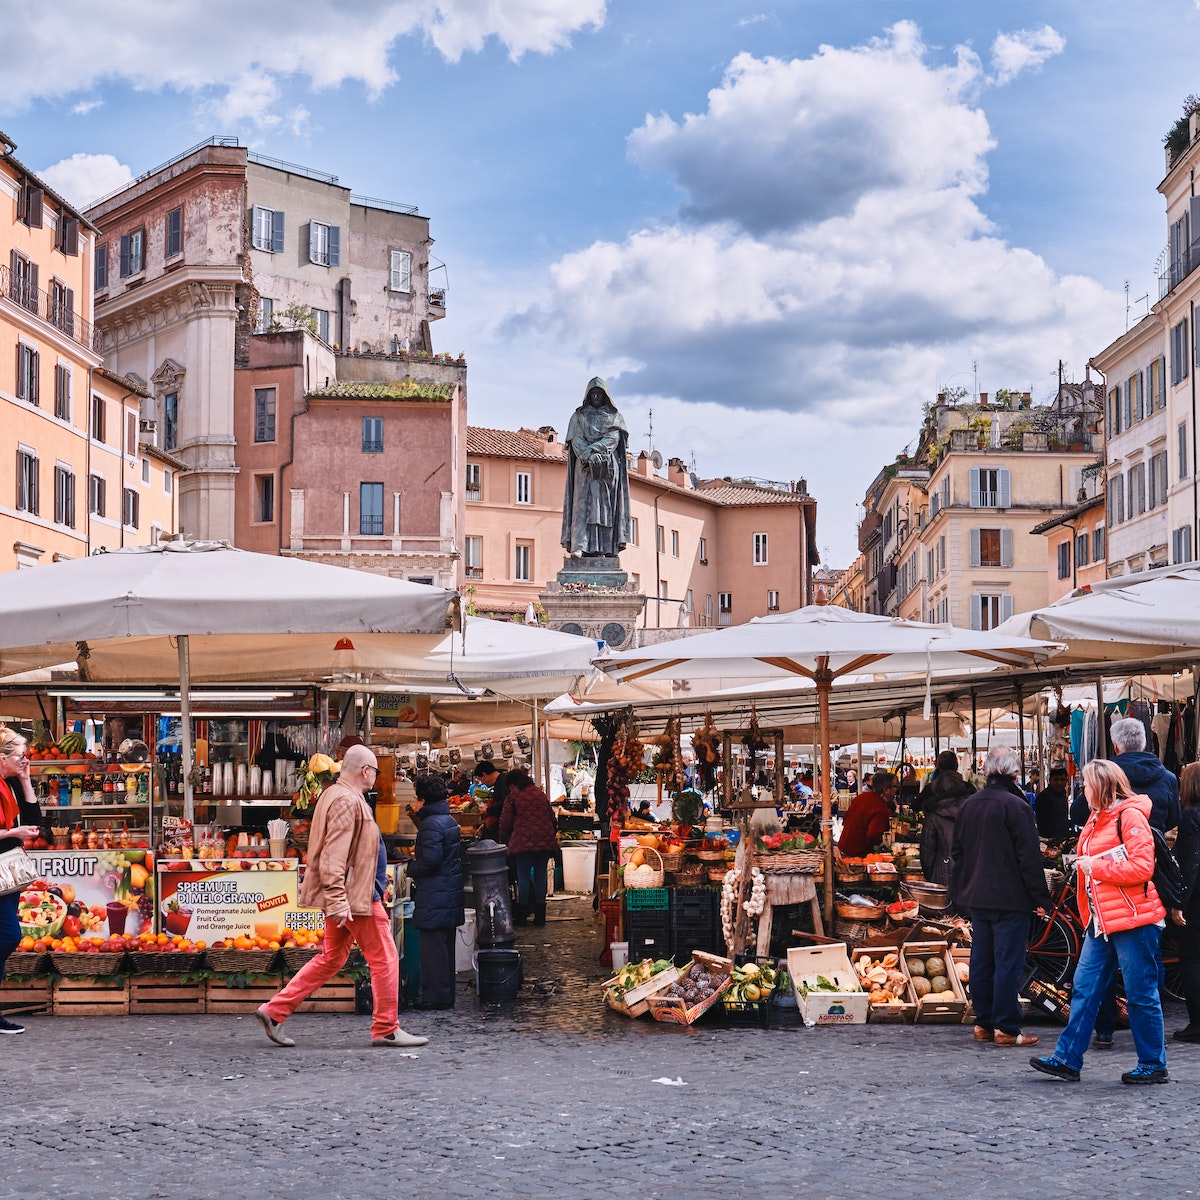 March 8, 2018: Traditional outdoor food market of Campo de Fiori (fields of flower), with the statue of Giordano Bruno in the background.
959994236
People Built Structure Food City History Architecture Nature Vacations Square Horizontal Three Quarter Length Outdoors Europe Tourist Monument Roman Italy Statue City Street Street Market - Retail Space Ancient Famous Place Rome - Italy Vegetable Fruit Flower Sky Agricultural Field Beauty Medium Group Of People Photography Tourism Travel Capital Cities Fiori Giordano Tradition